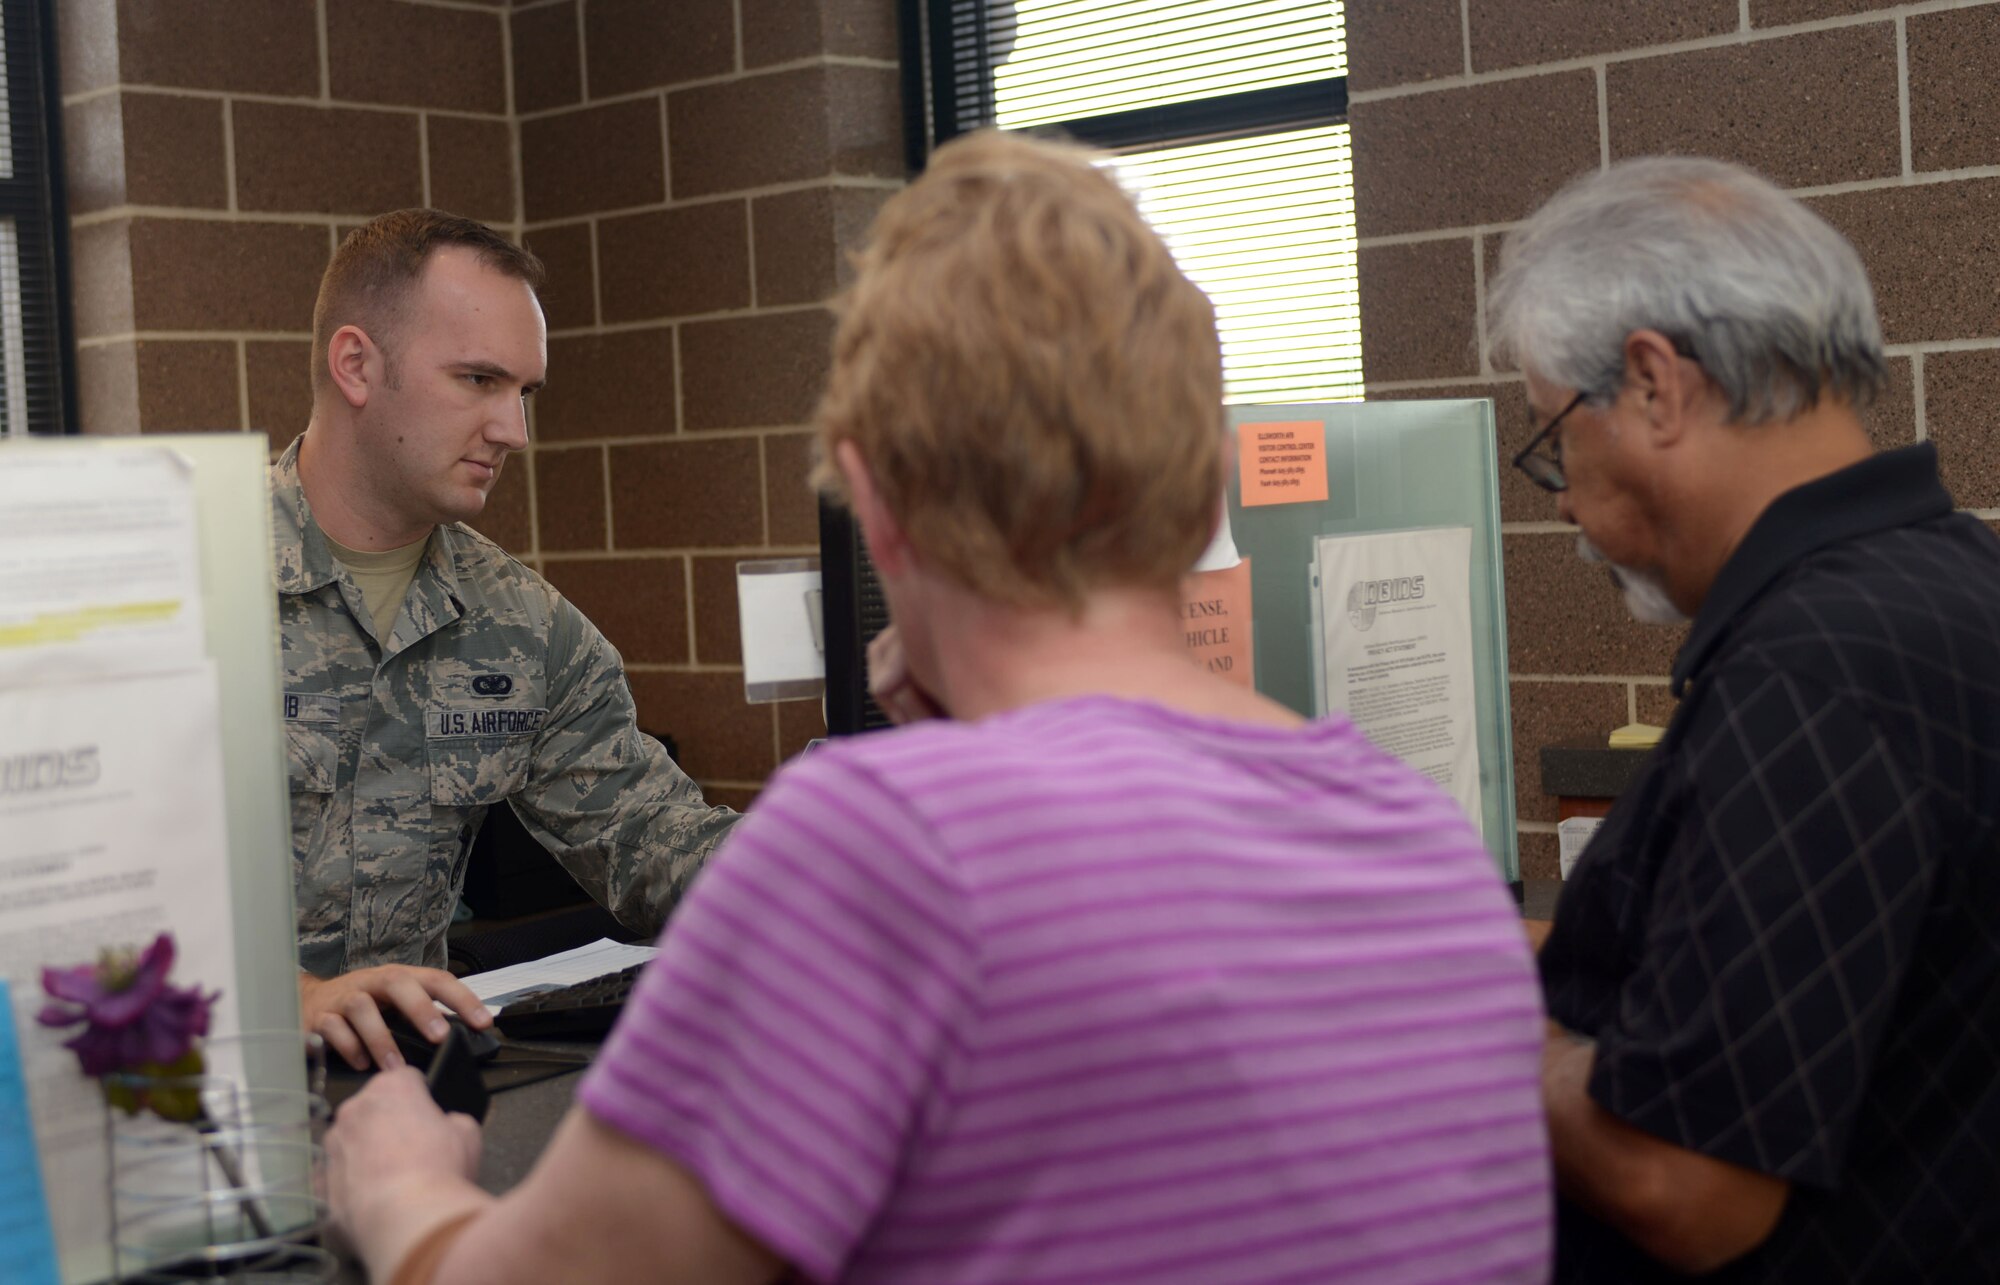 Senior Airman William Shaub, a visitor control center clerk assigned to the 28th Security Forces Squadron, assists a family with base access at Ellsworth AFB, S.D., Oct. 27, 2016. During an average week, the VCC issues approximately 150 paper passes and 80 Department of Defense identification cards to visitors seeking to enter the installation. (U.S. Air Force photo by Airman 1st Class Donald Knechtel)